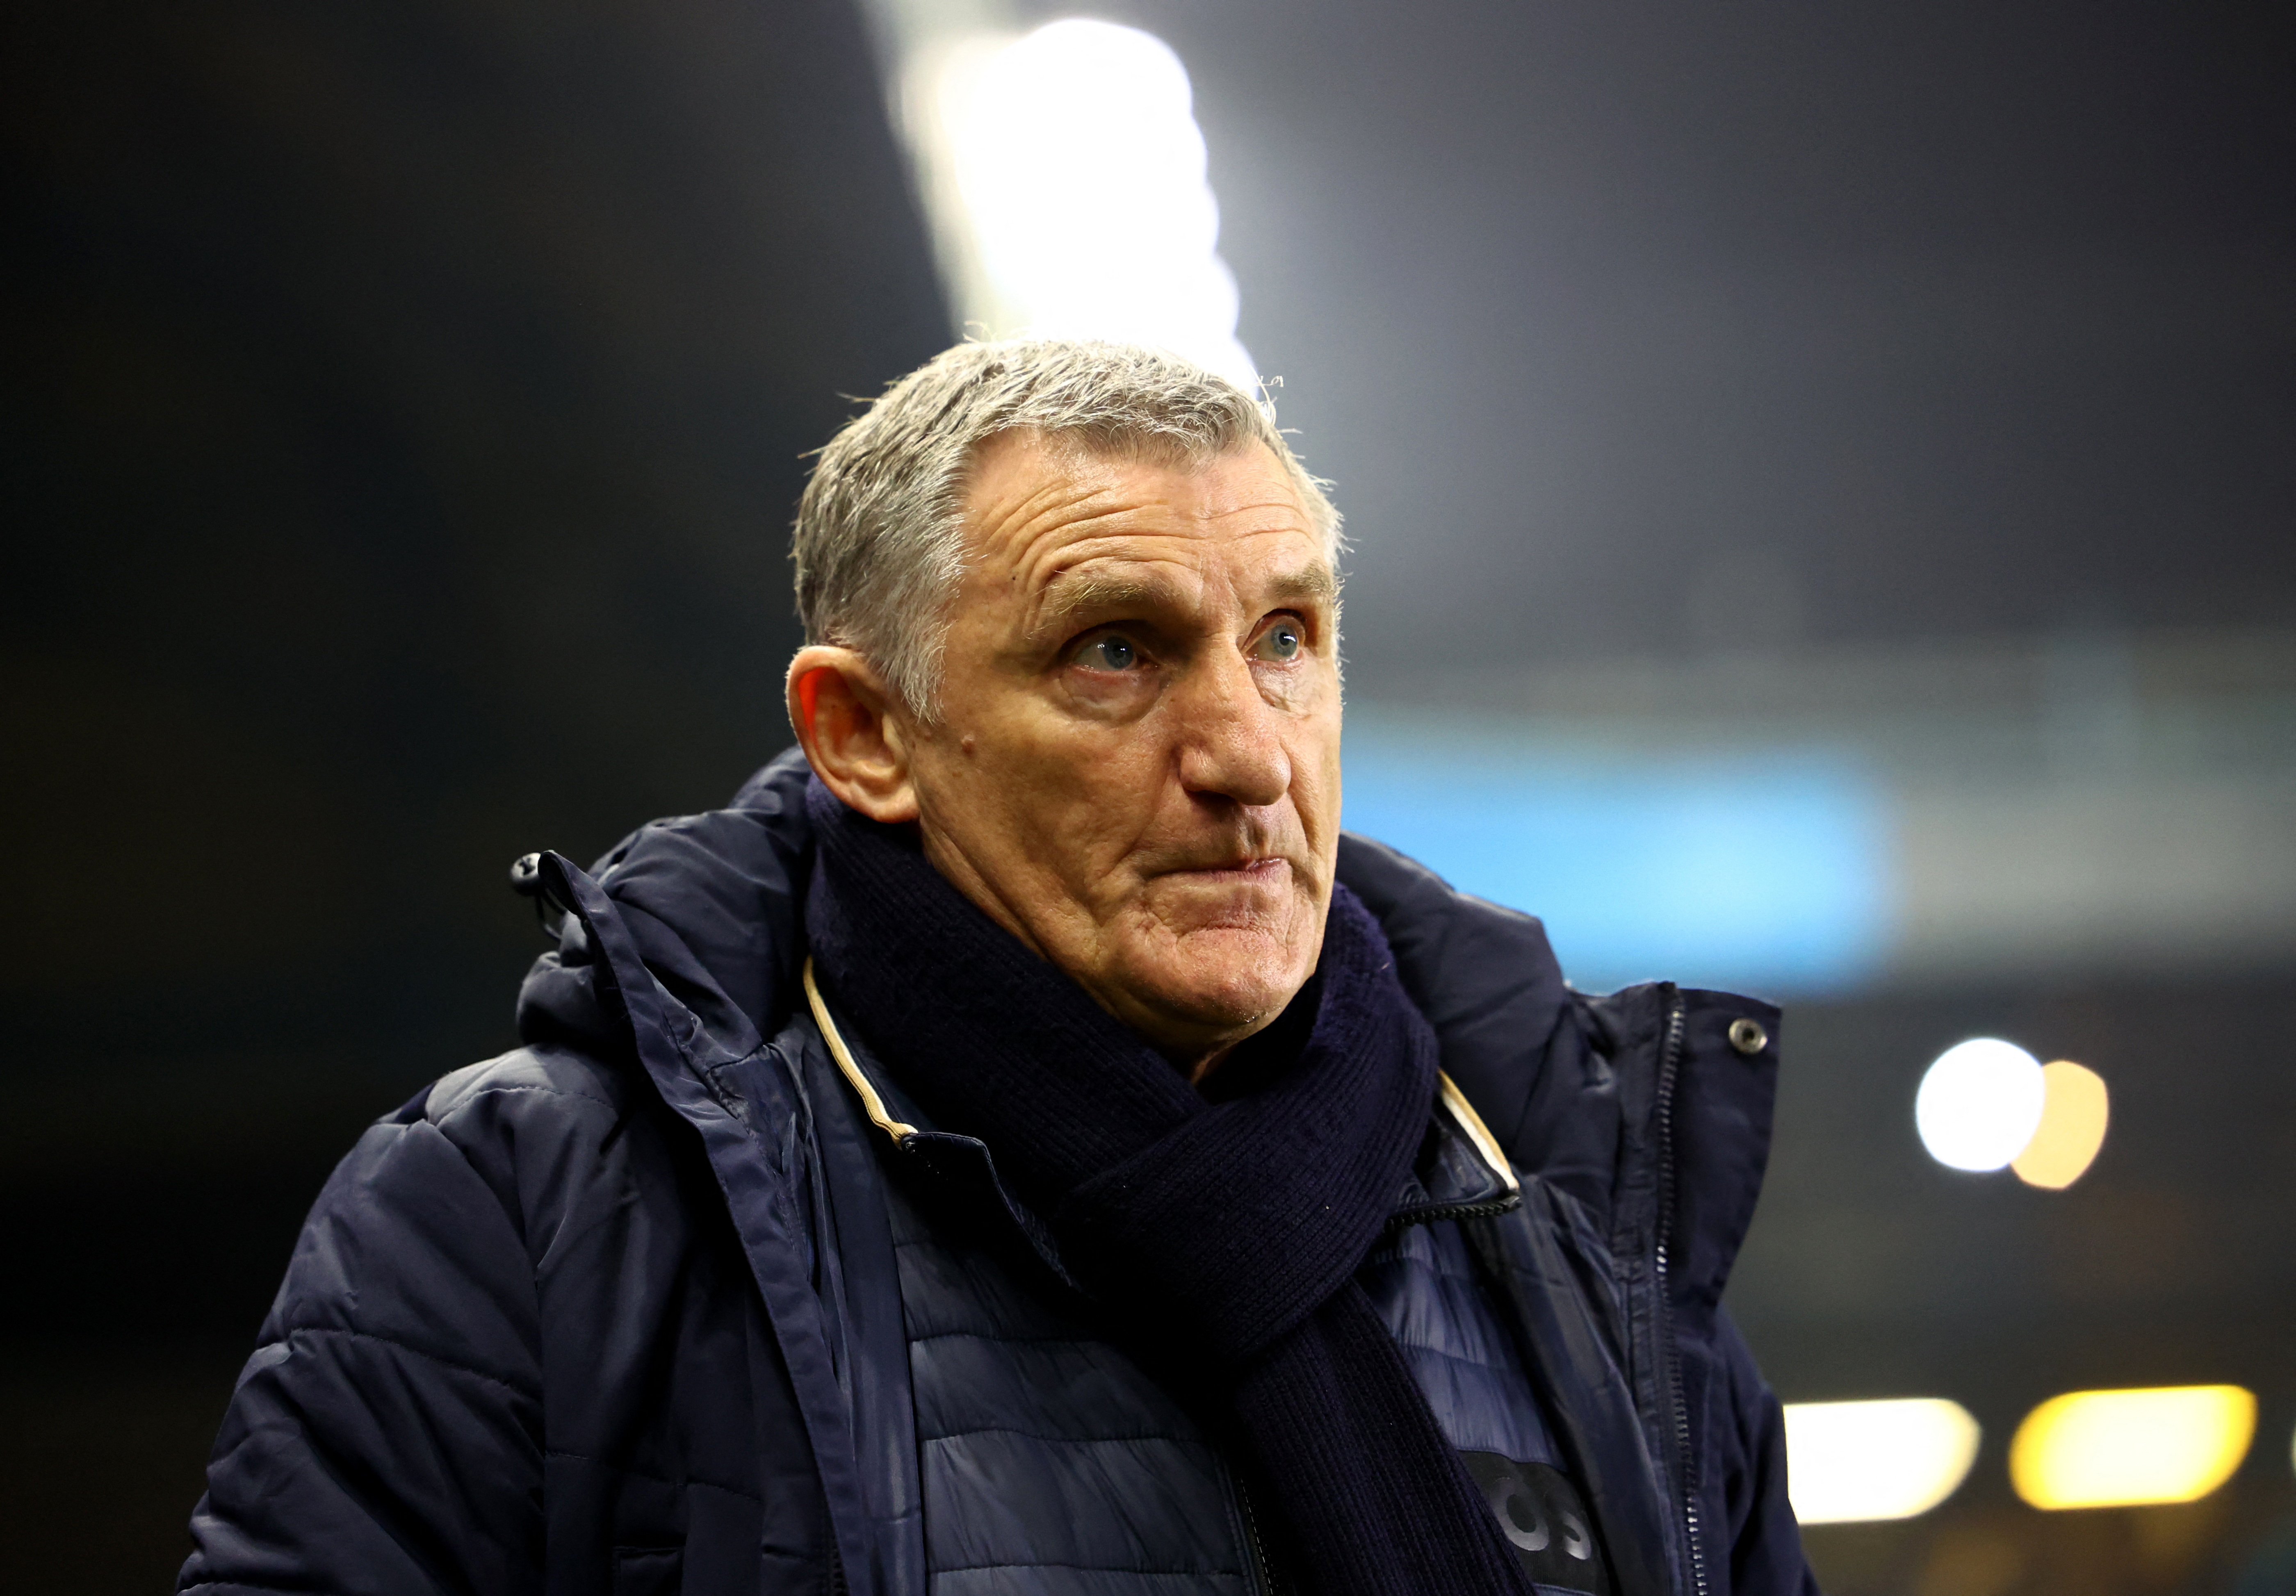 Mowbray steps down as Birmingham City manager after surgery | Reuters